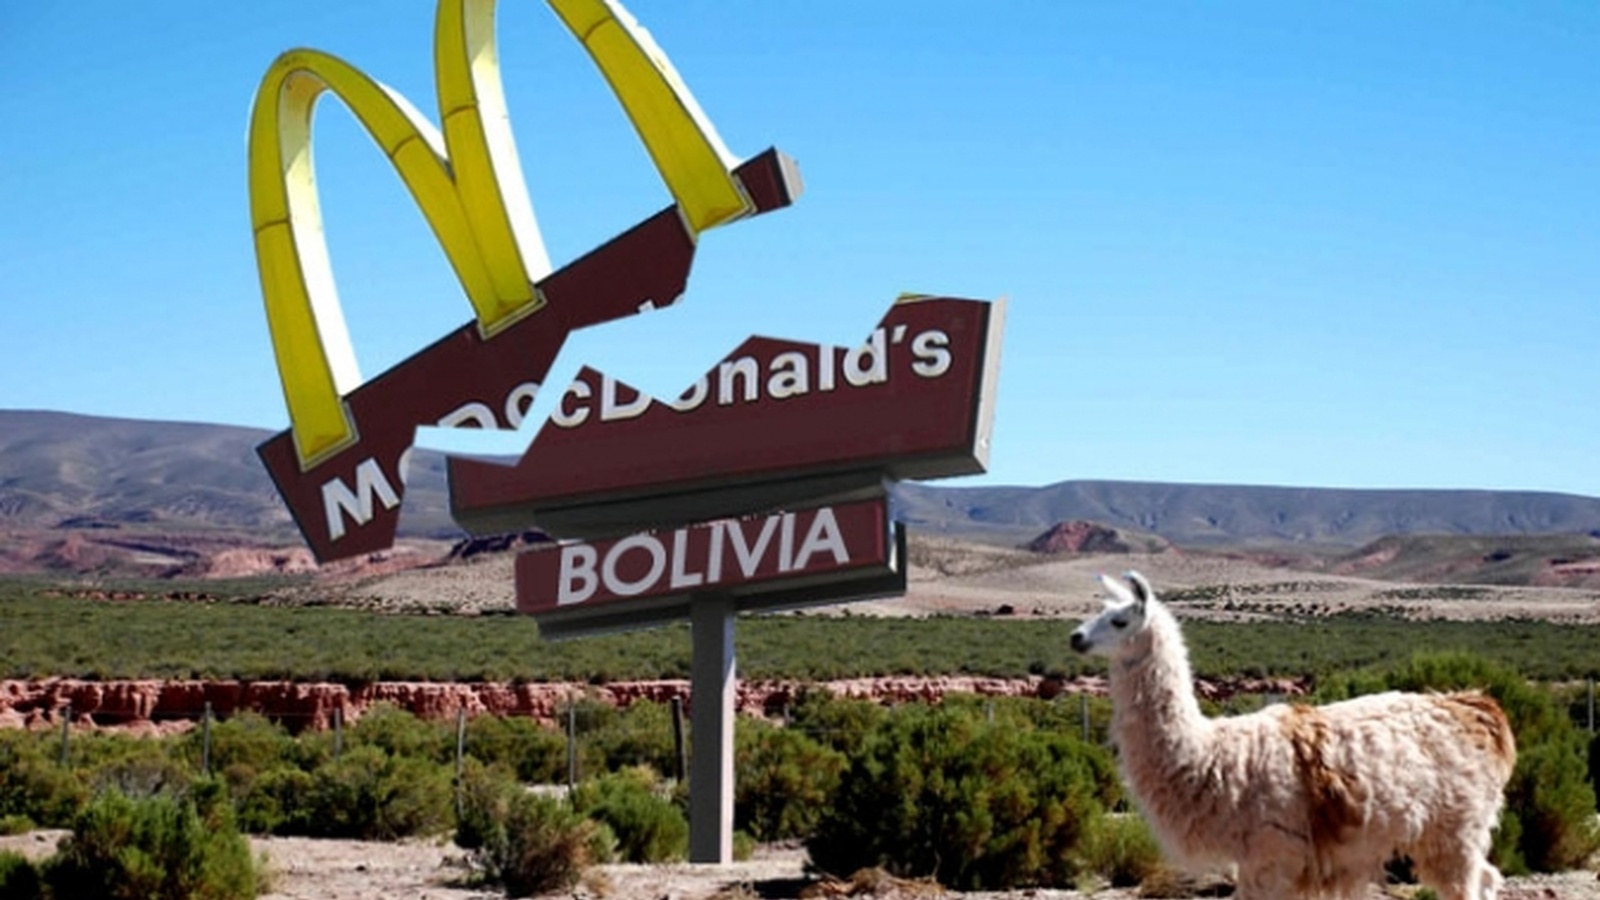 FINALLY! A Whole Nation Rejects McDonalds